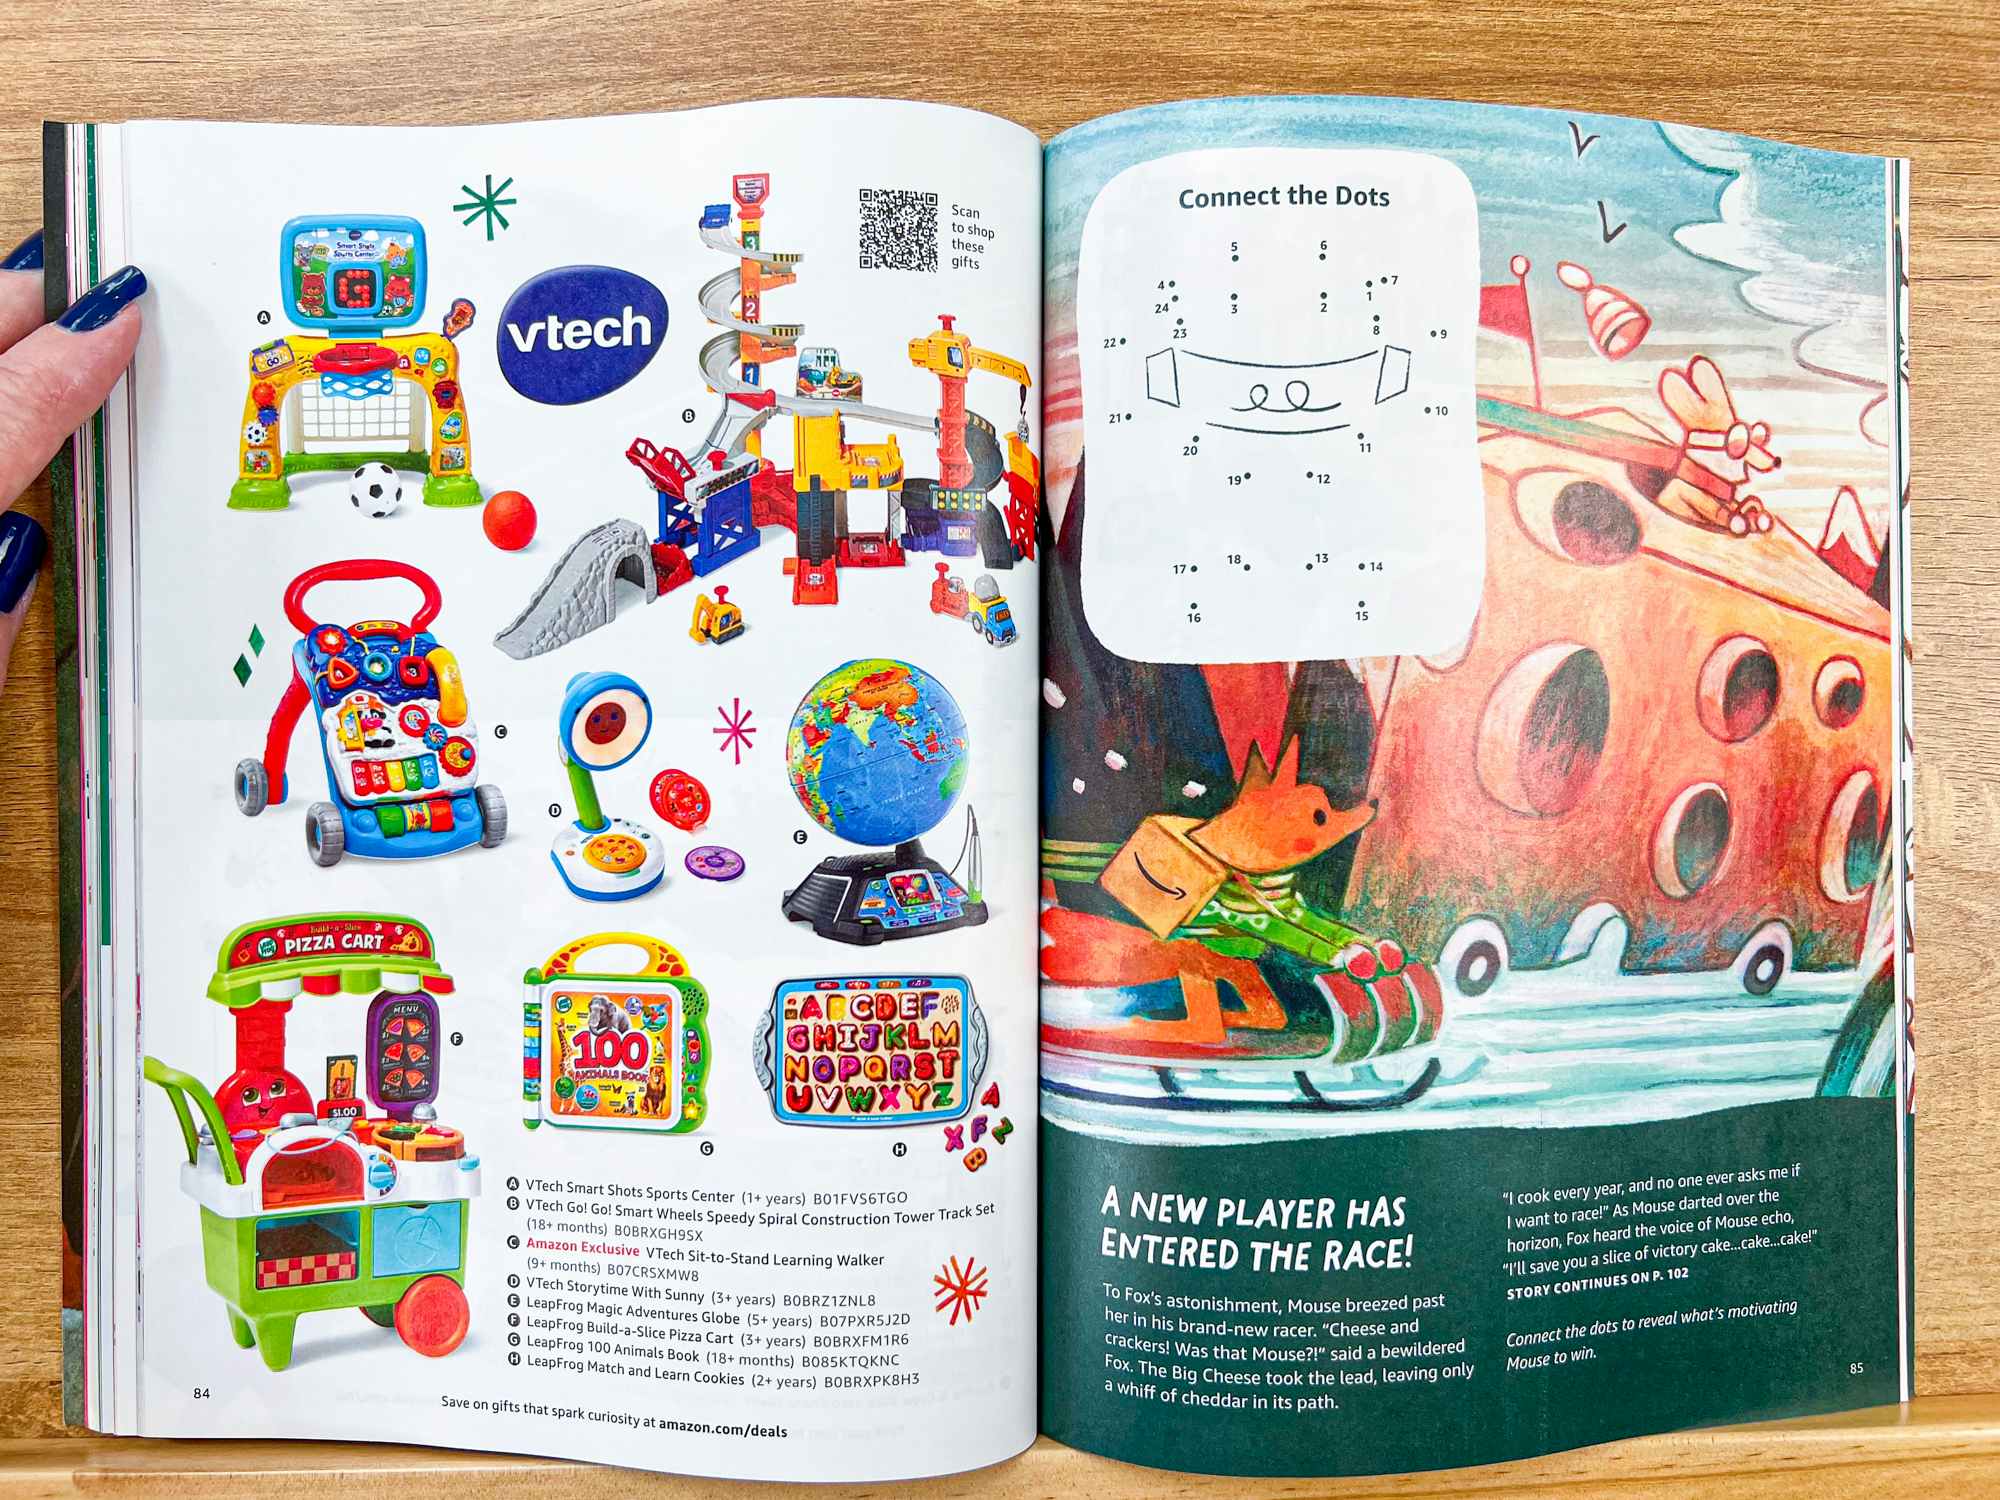 pages from the 2023 Amazon Holiday Toy Book